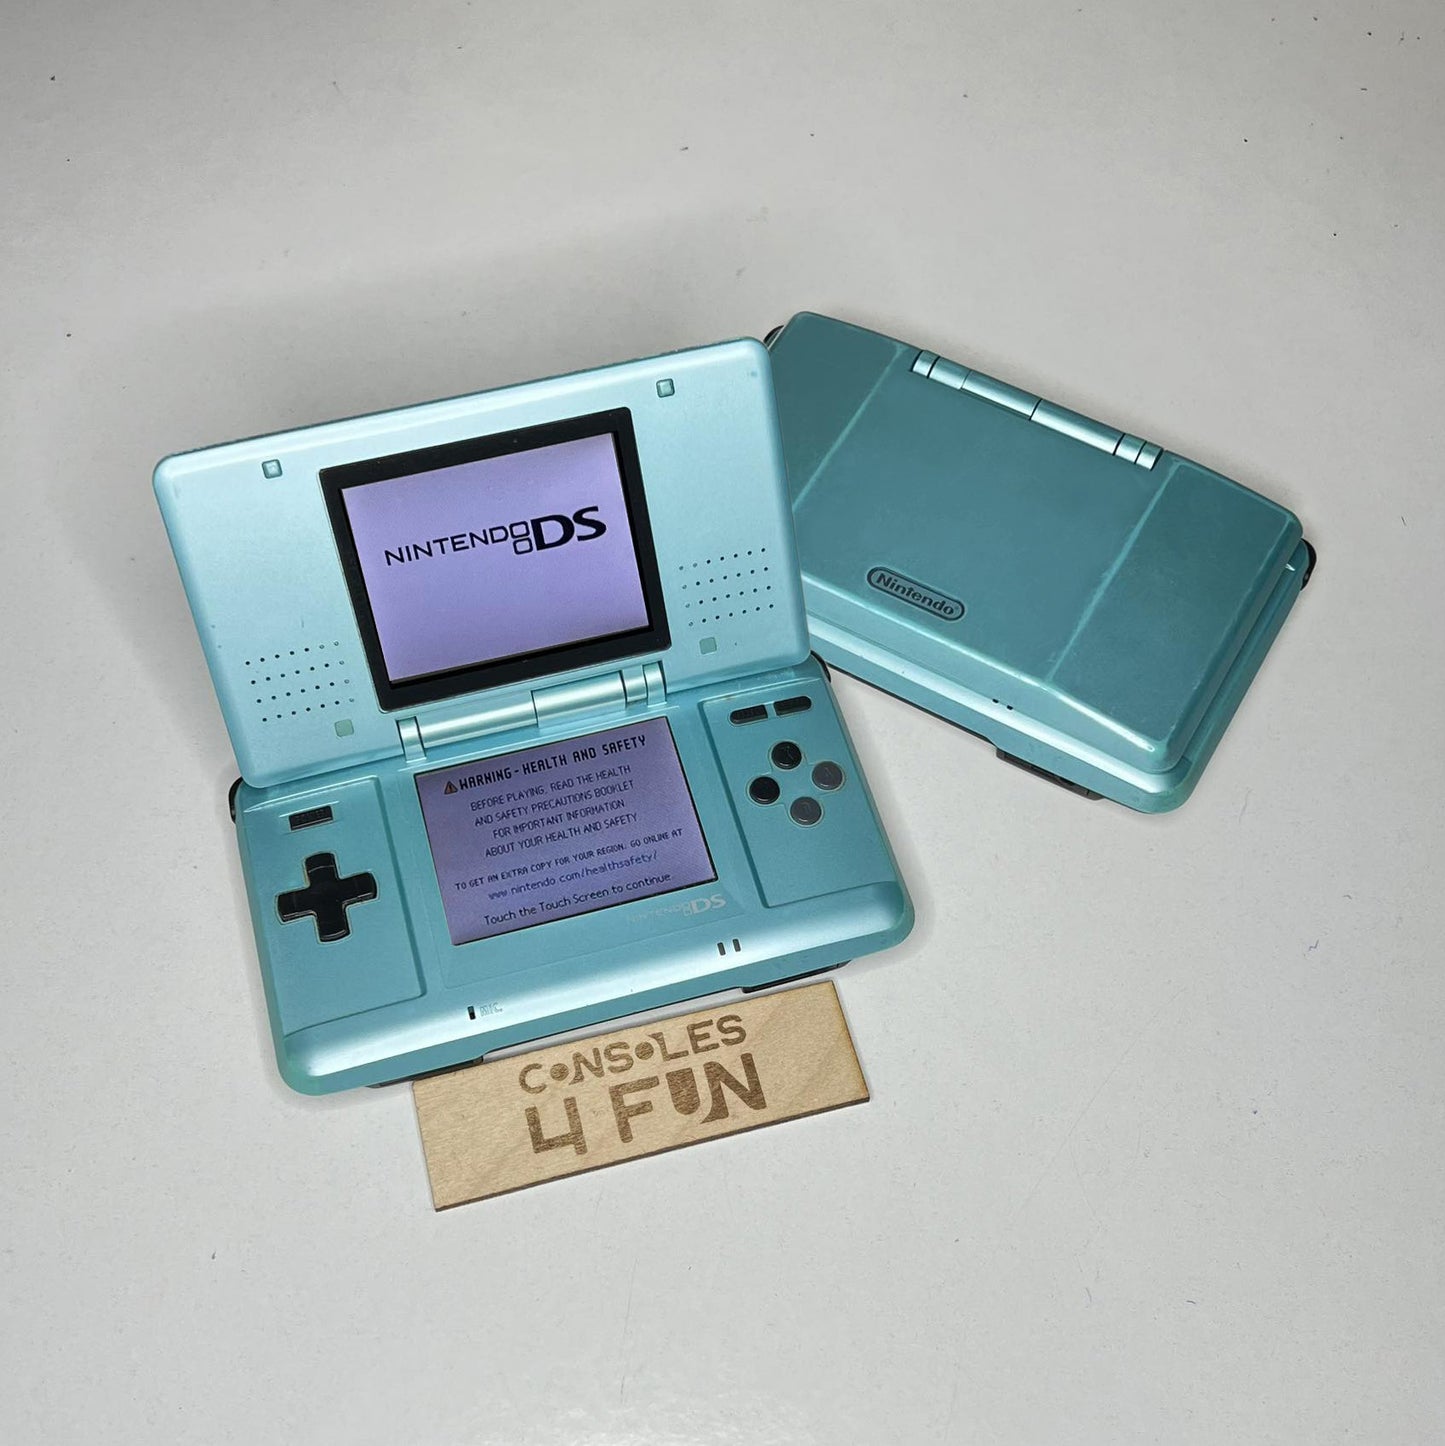 Nintendo DS with Games